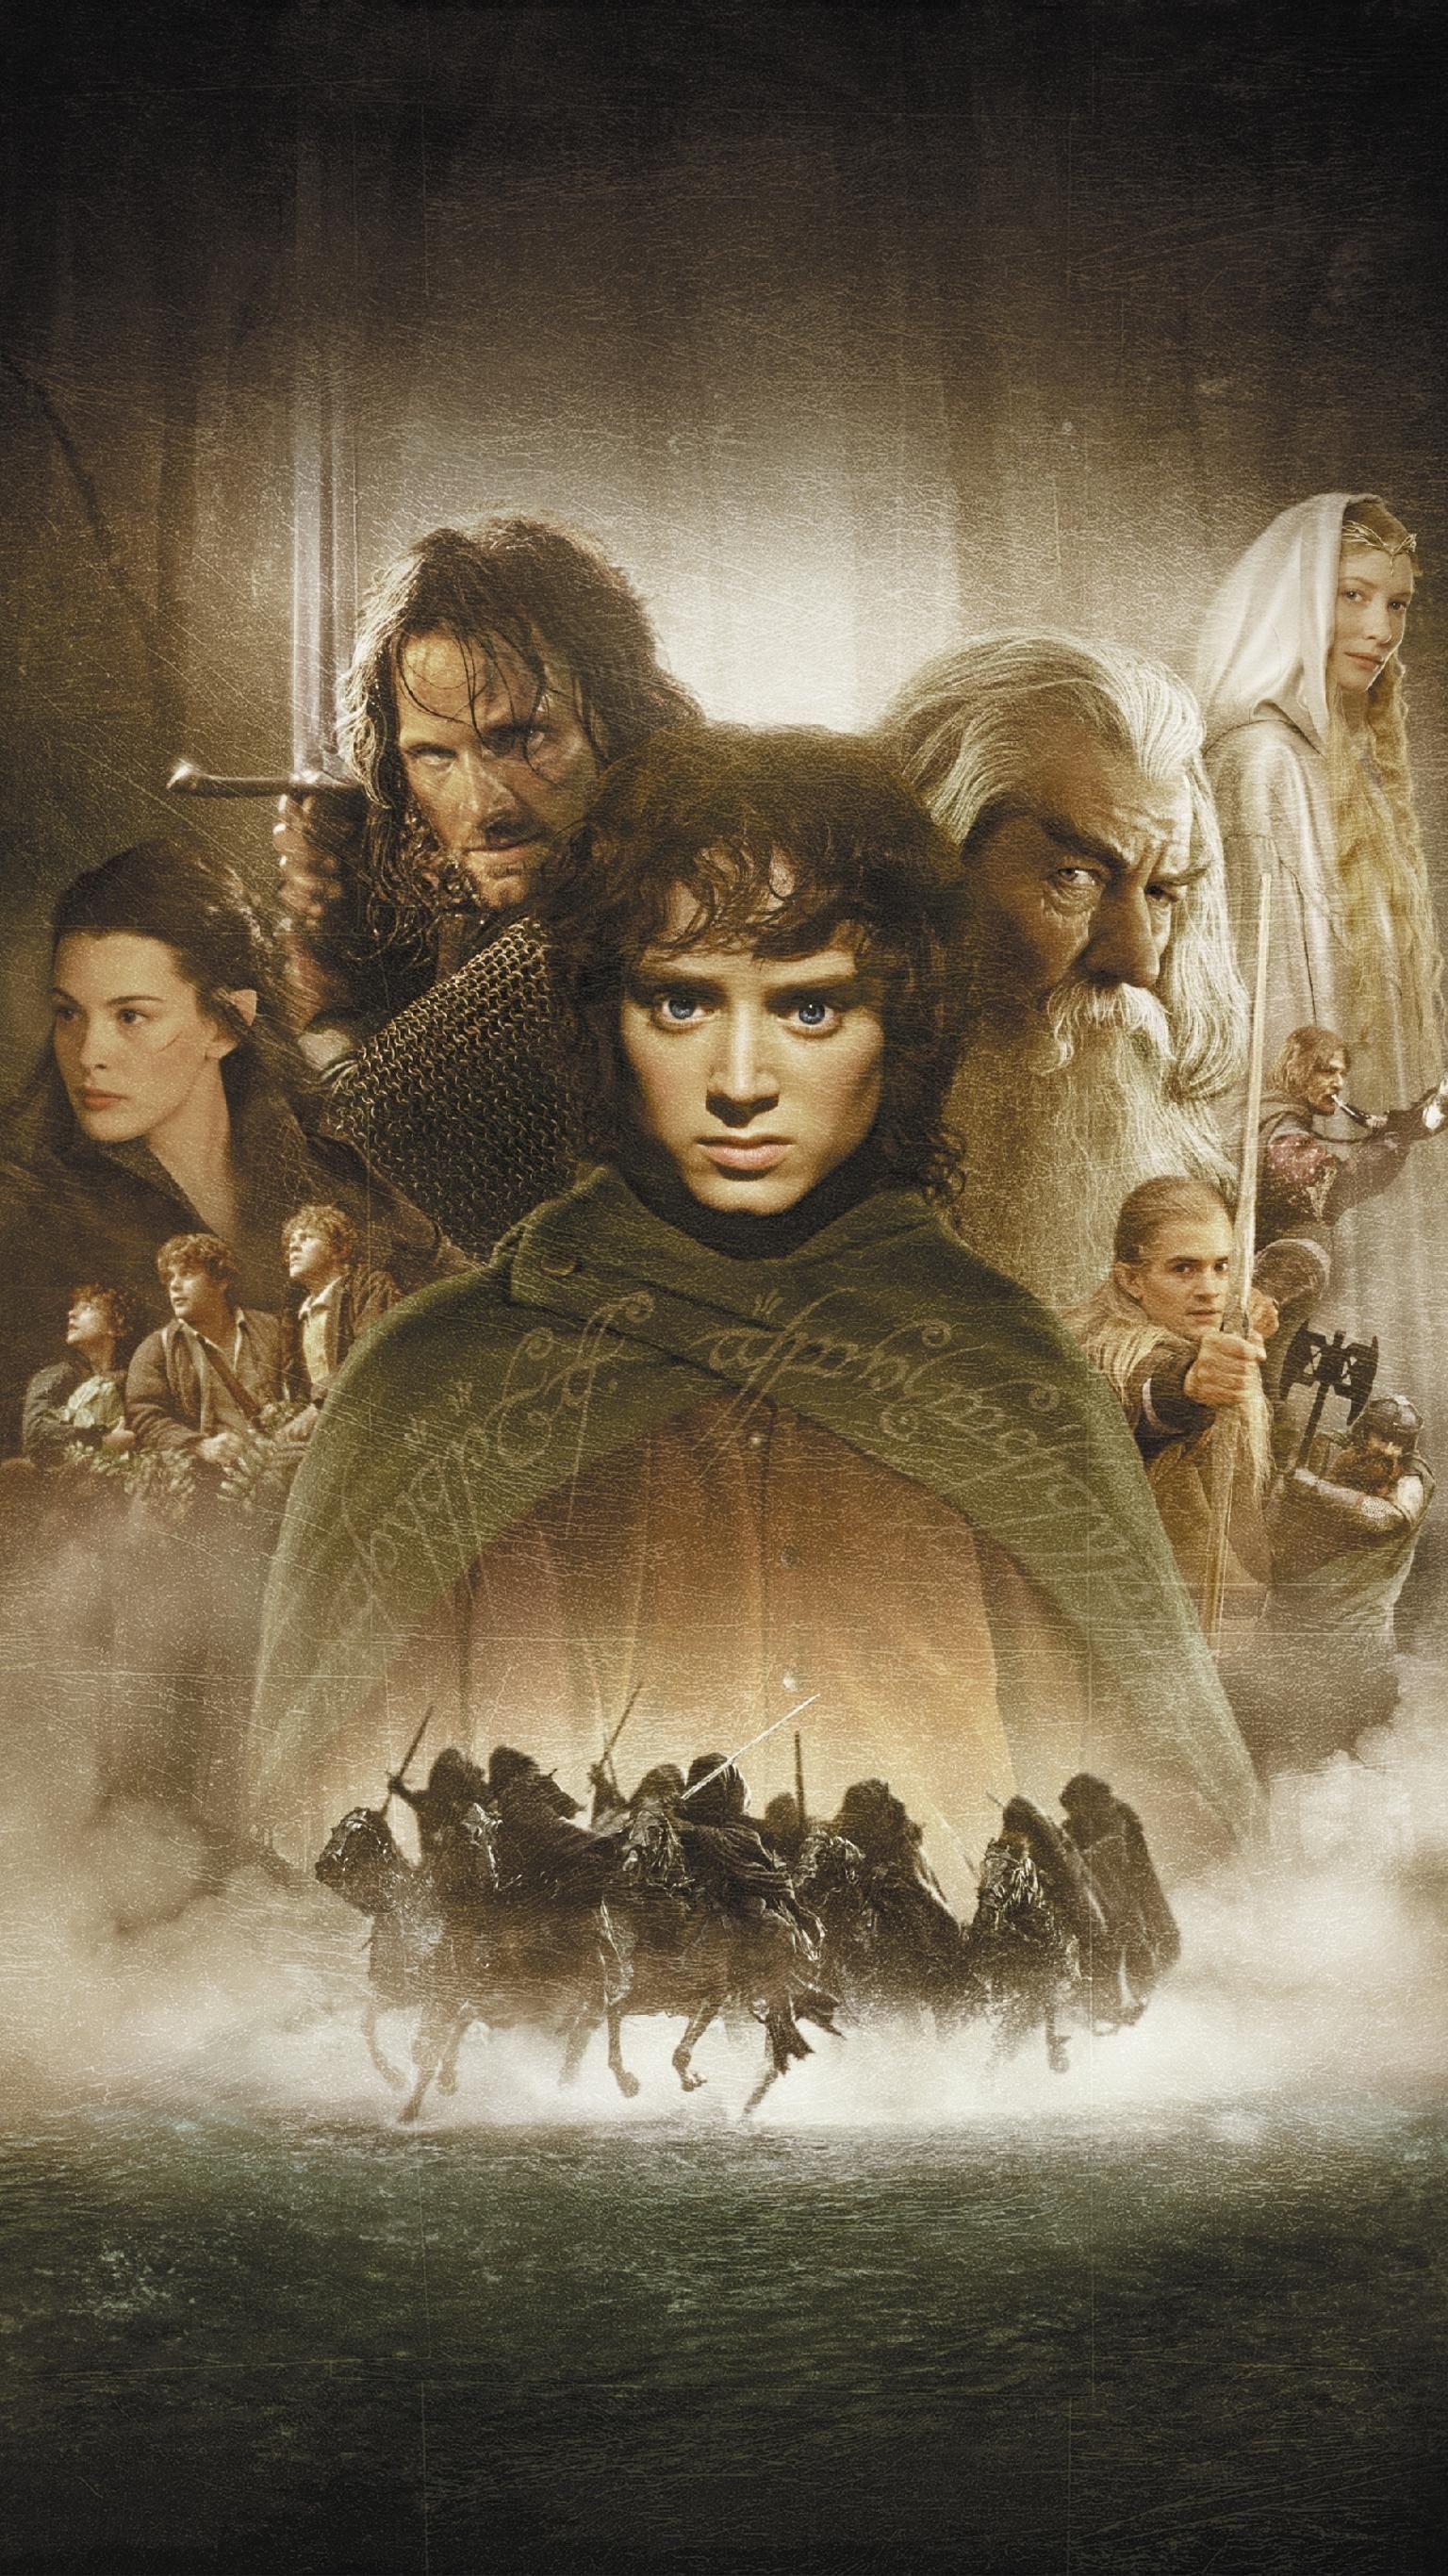 The Lord of the Rings: The Fellowship of the Ring (2001) Phone